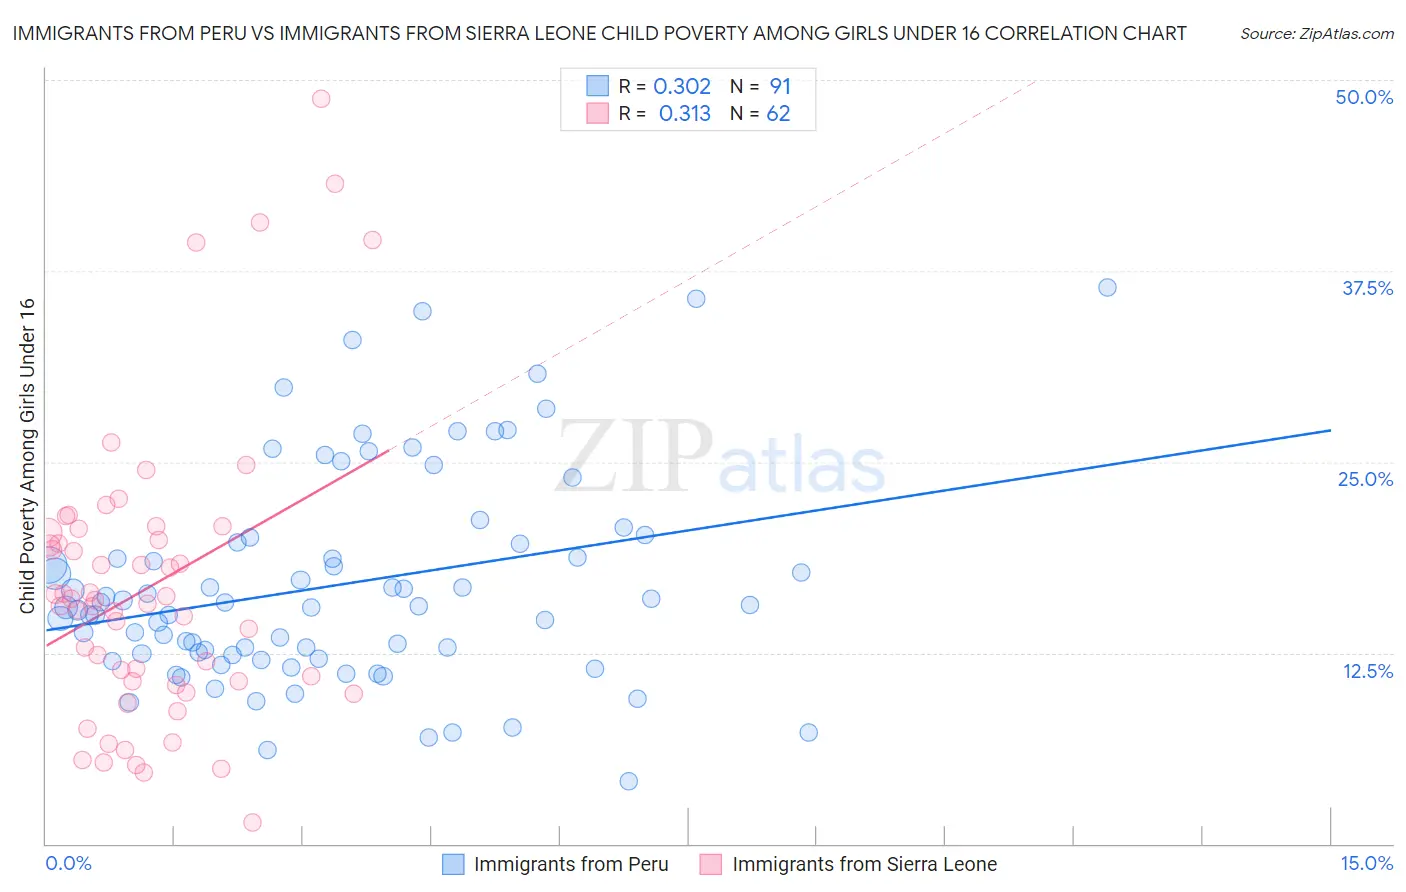 Immigrants from Peru vs Immigrants from Sierra Leone Child Poverty Among Girls Under 16